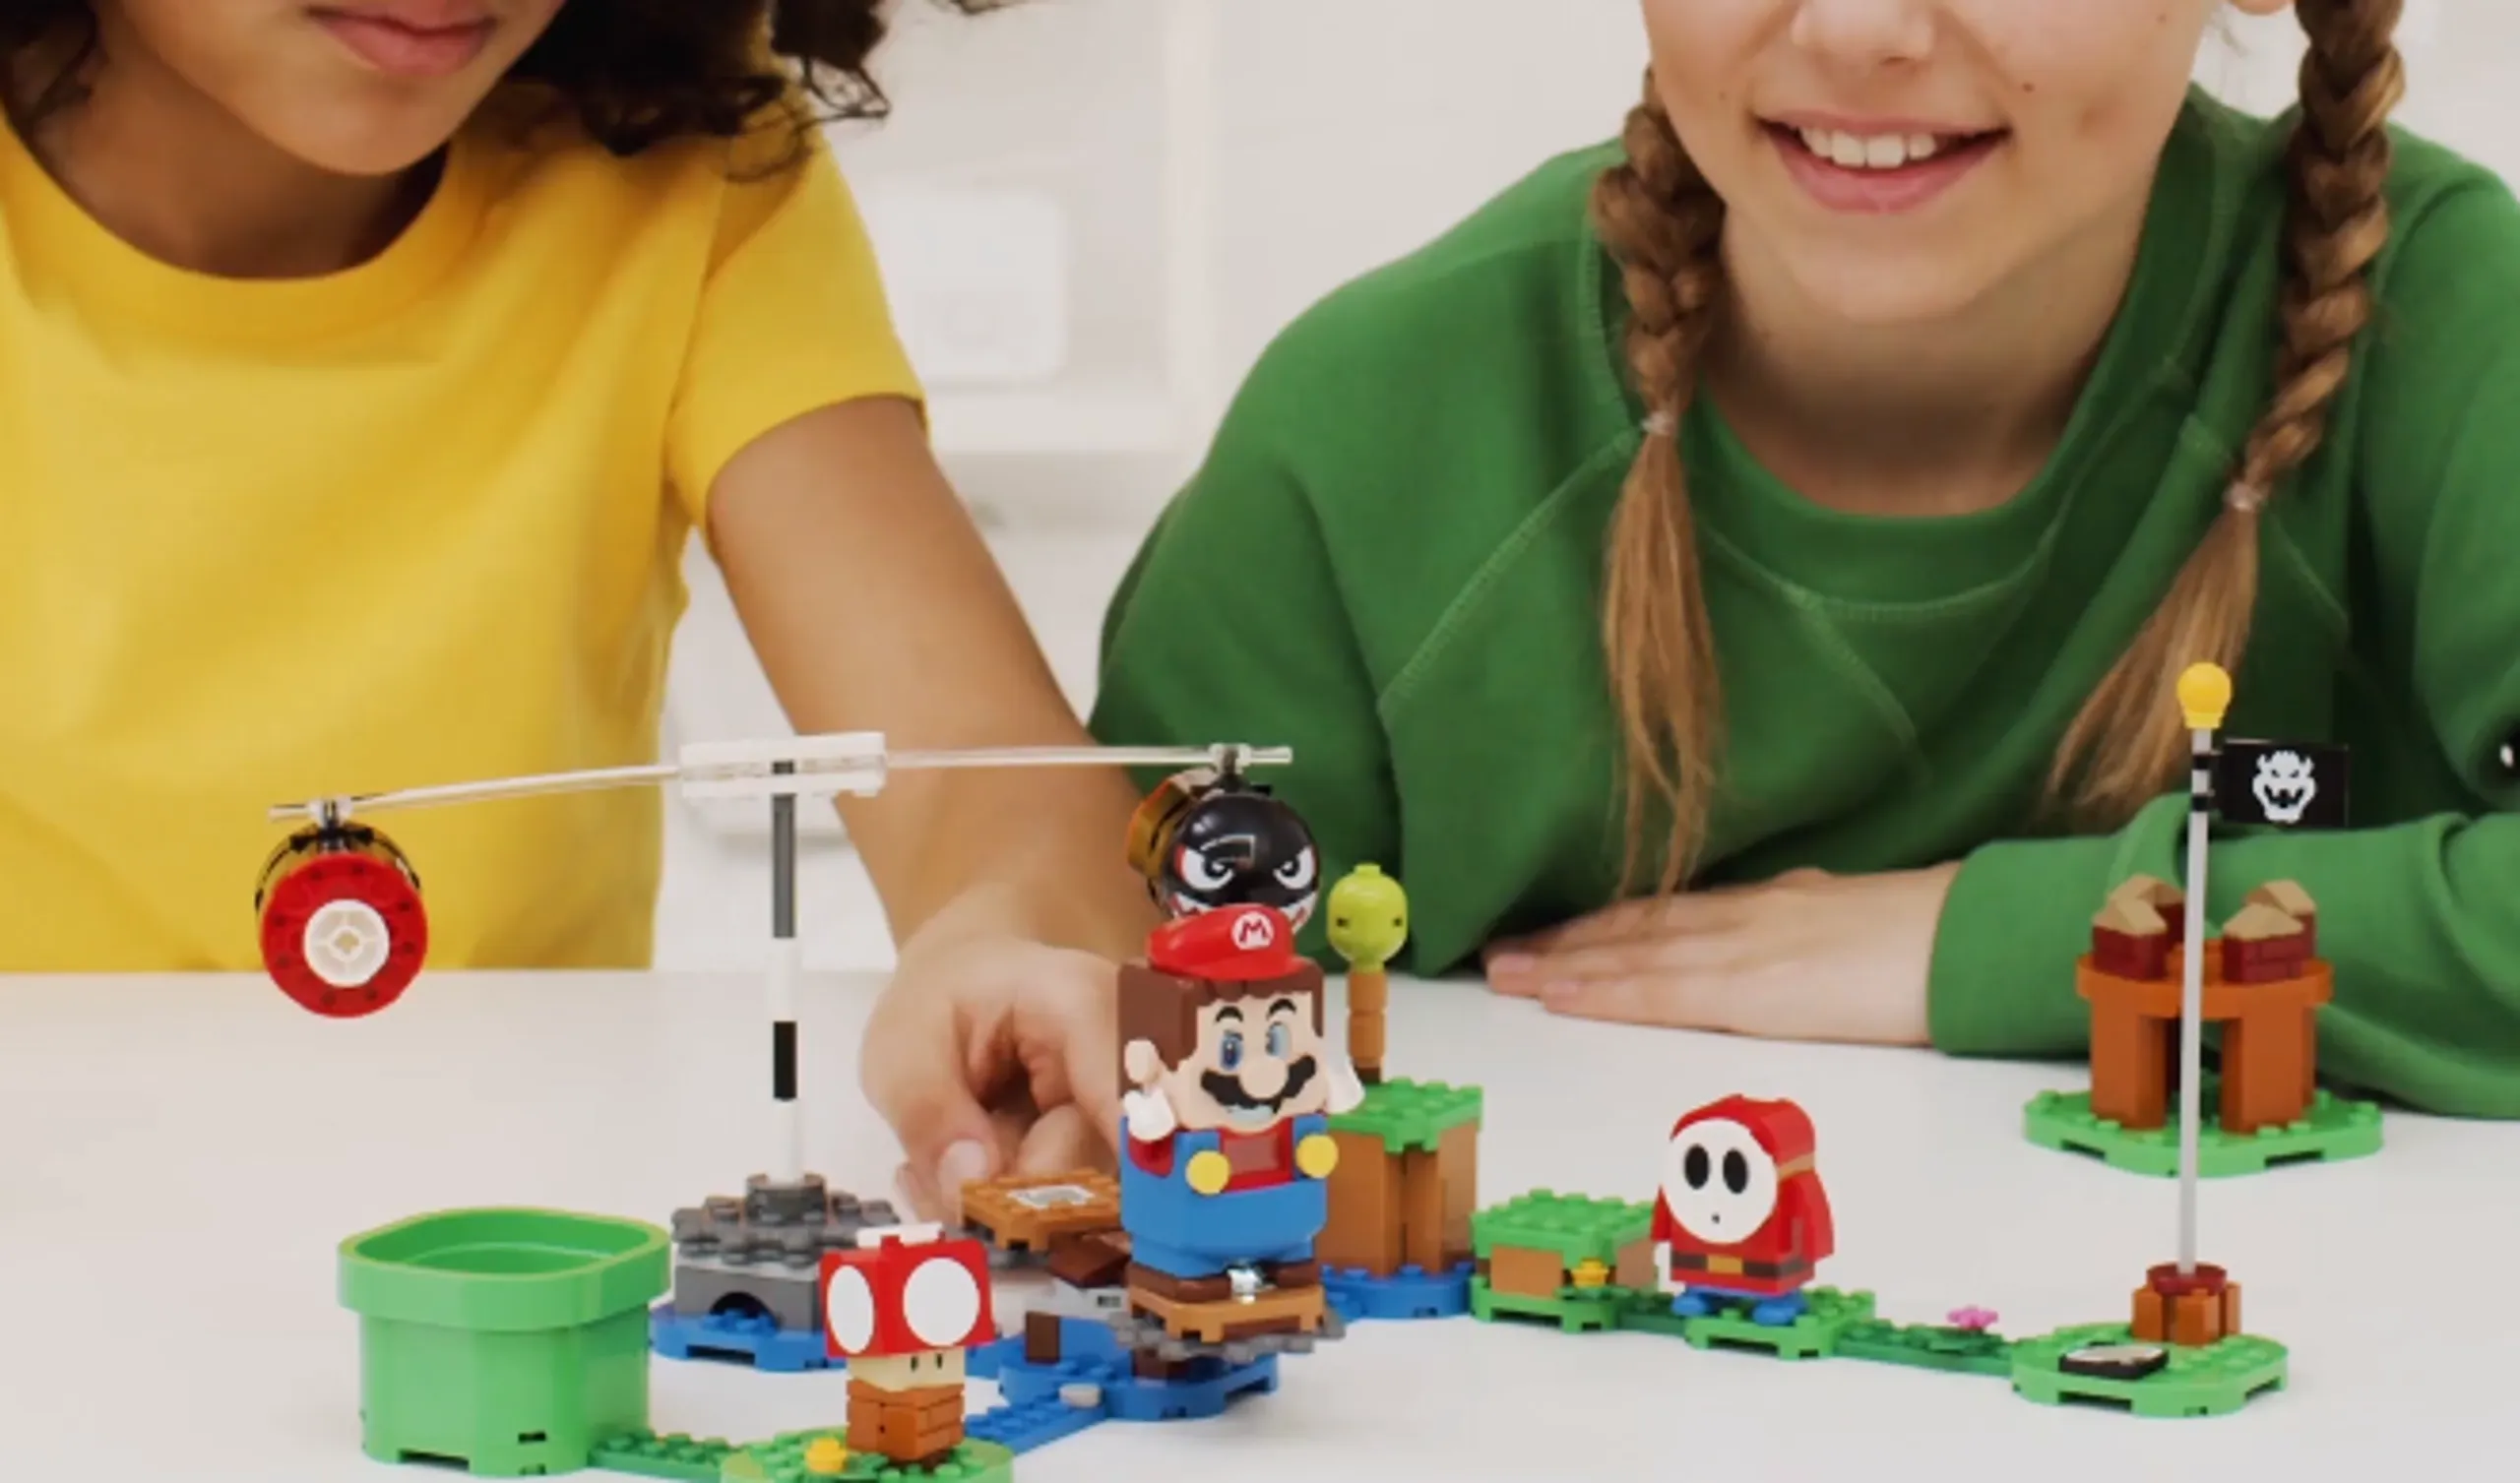 Find amazing products in LEGO Super Mario today